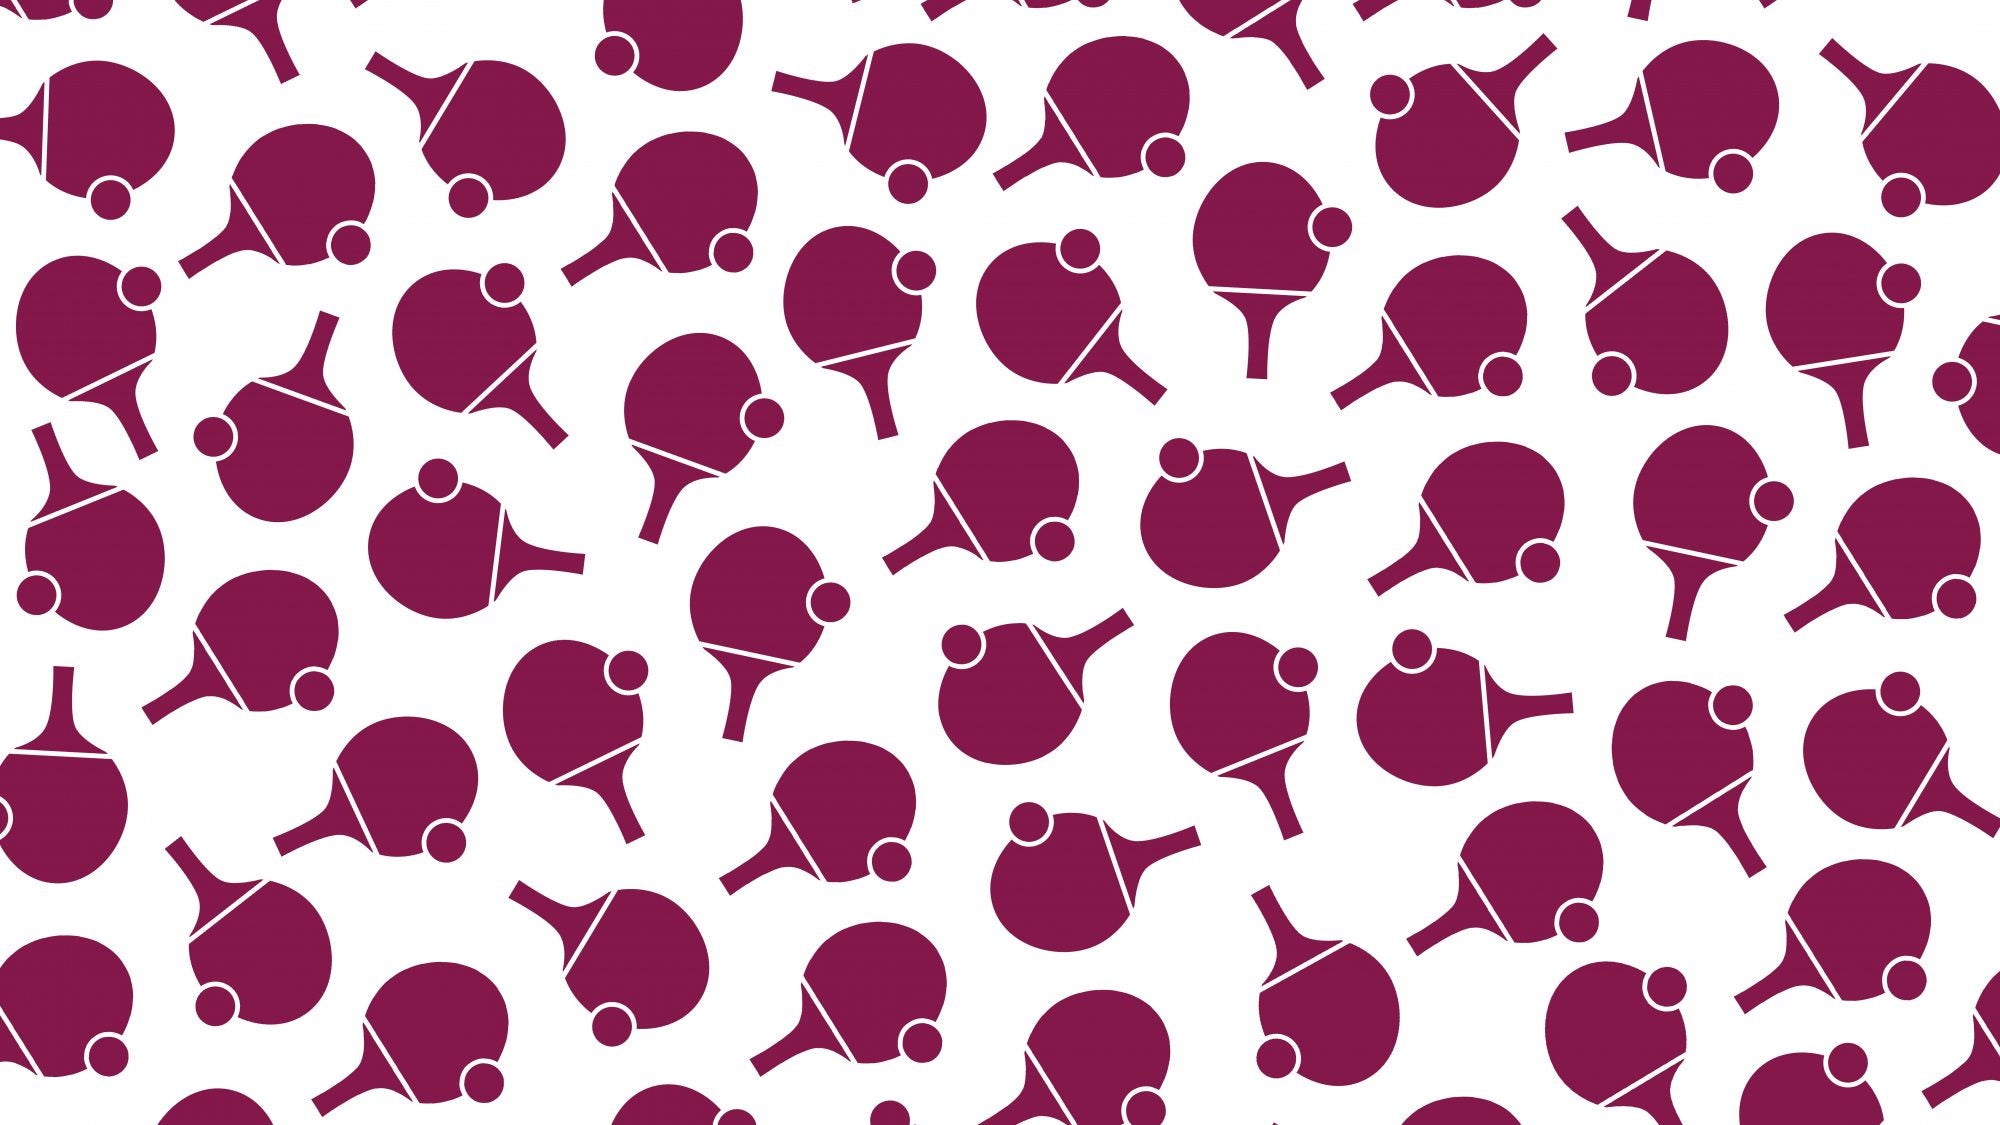 White graphic with a magenta table tennis paddle illustration pattern.